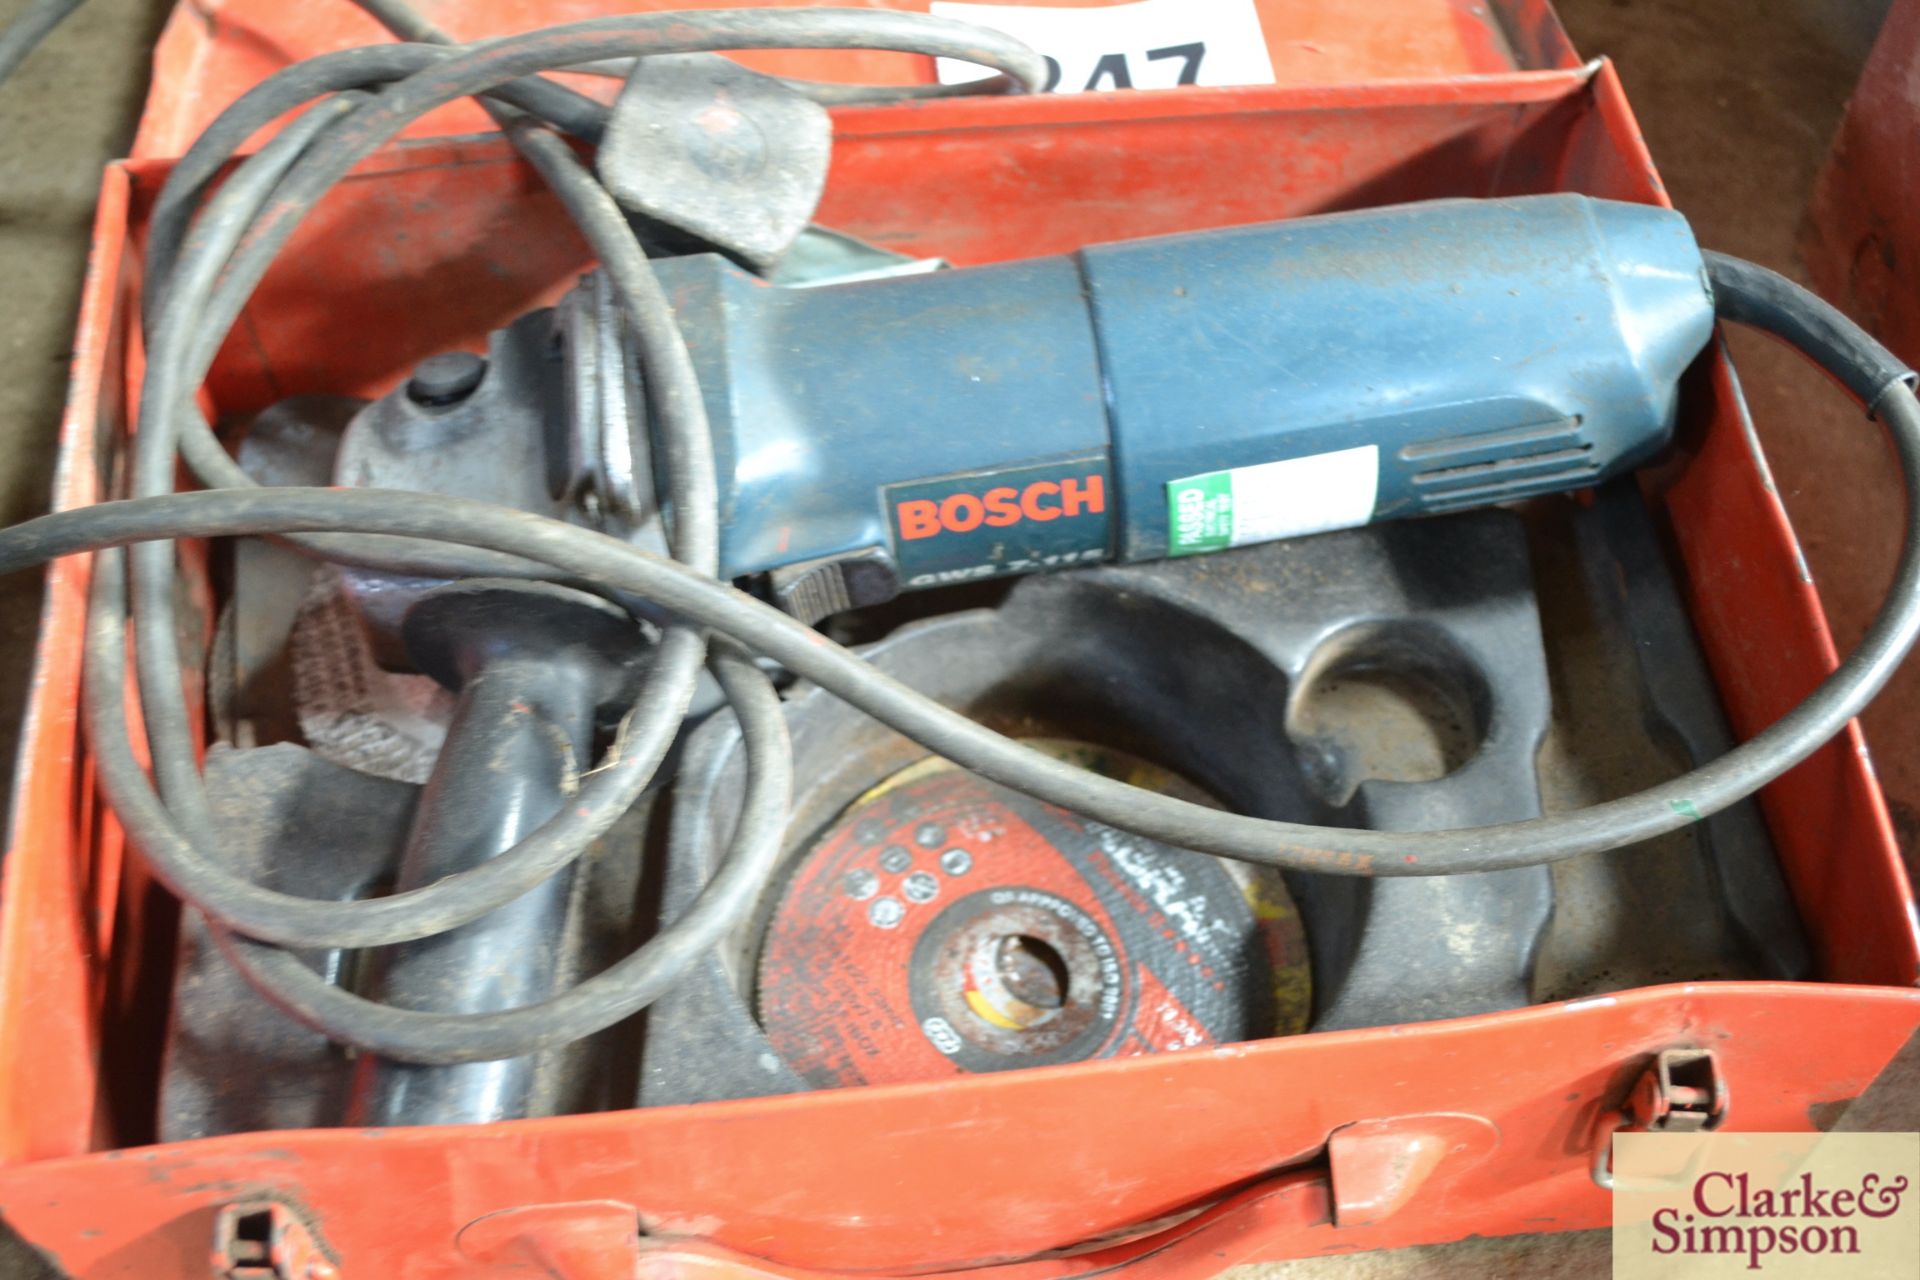 Bosch 4 1/2in angle grinder. - Image 2 of 2